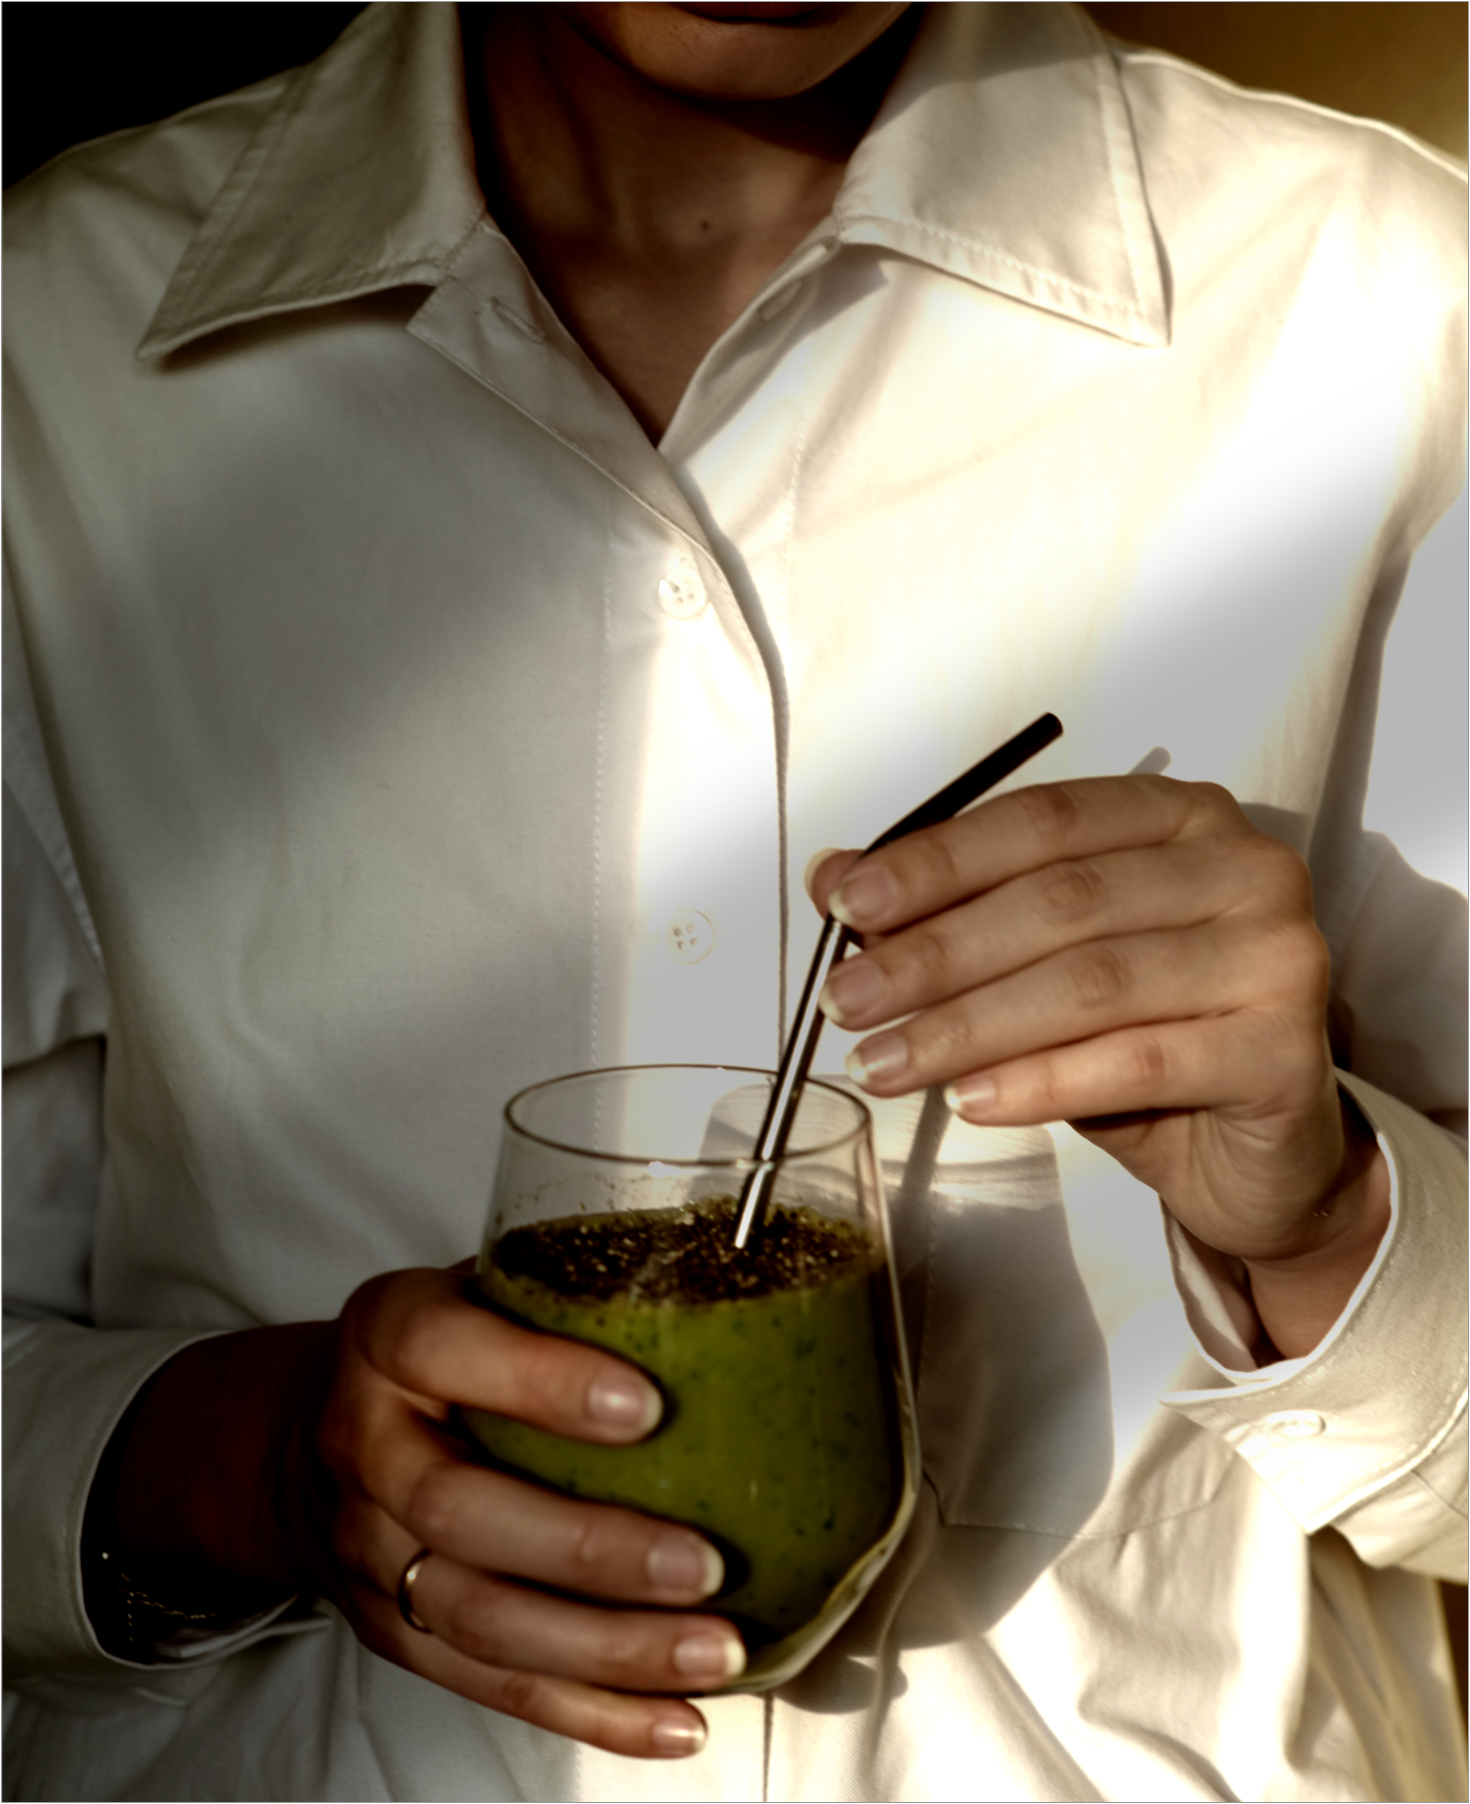 A picture of a torso in a white shirt with the person’s right hand holding a glass of green shake with a metal straw in it. Their left hand rests at the bend of the straw.